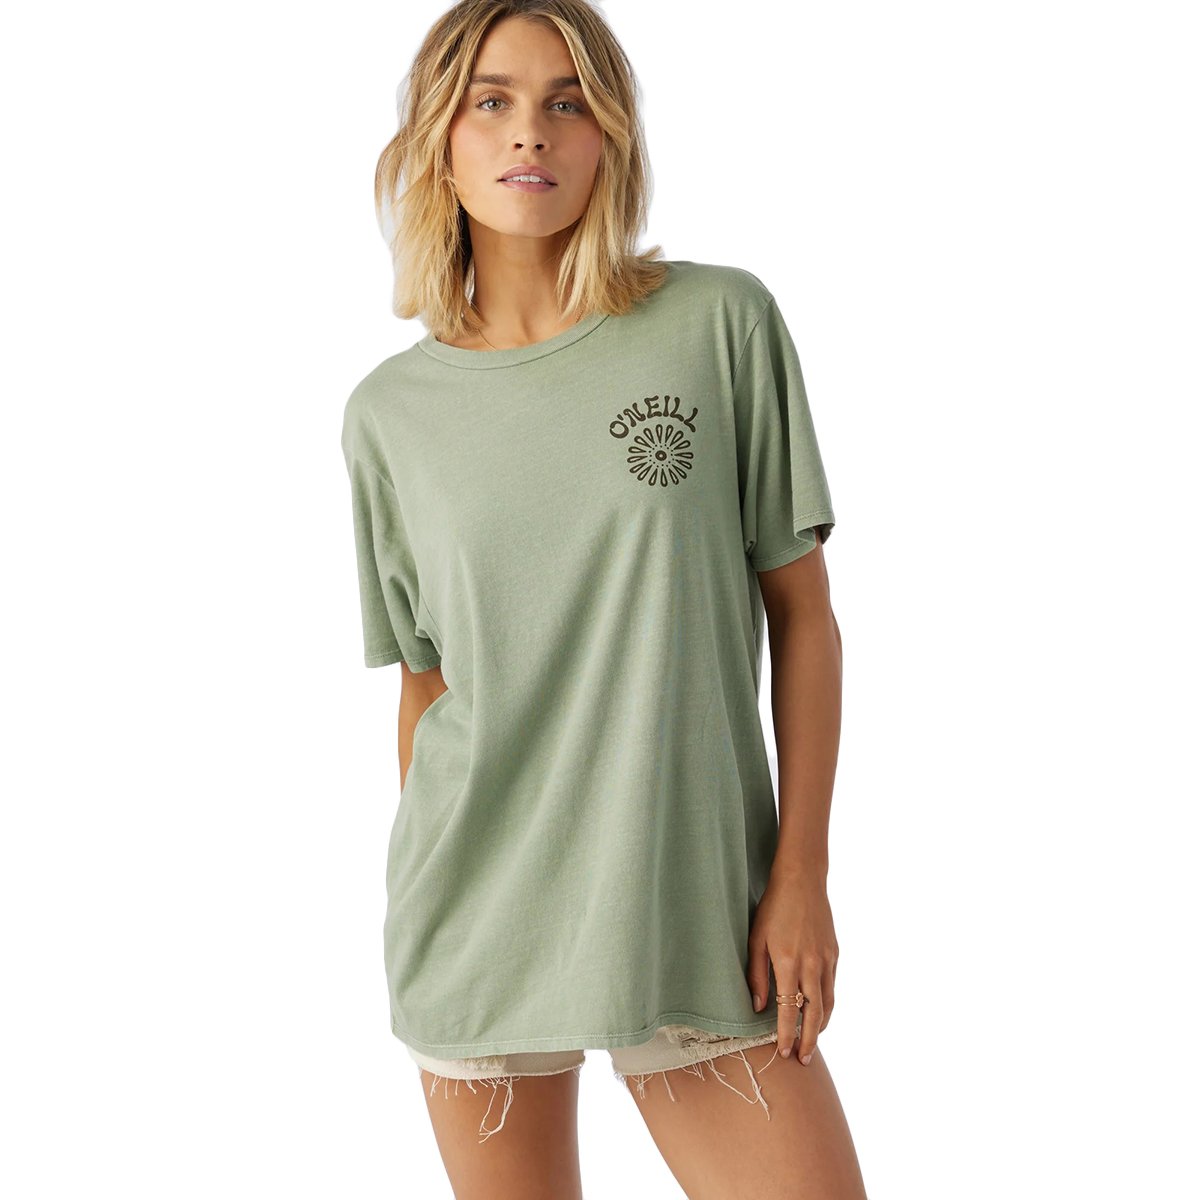 O'neill Juniors' Be Kind Short-Sleeve Graphic Tee